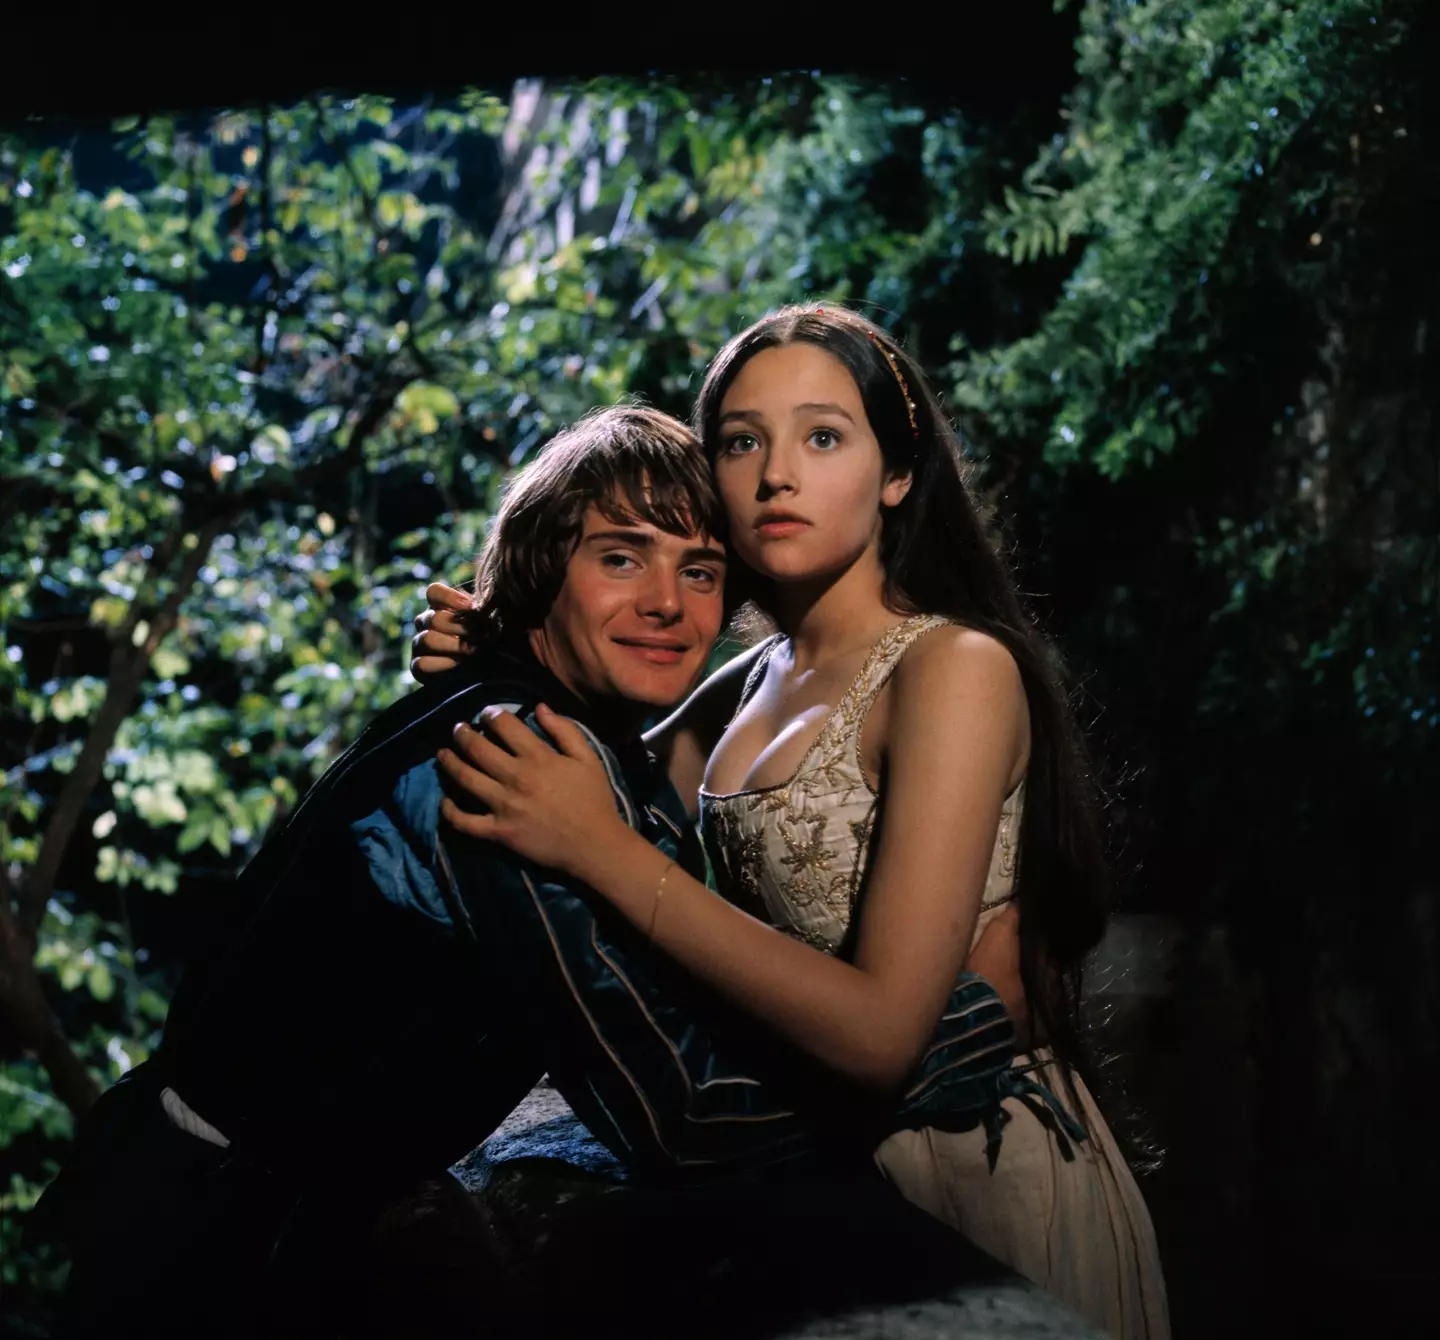 A still from Romeo and Juliet.